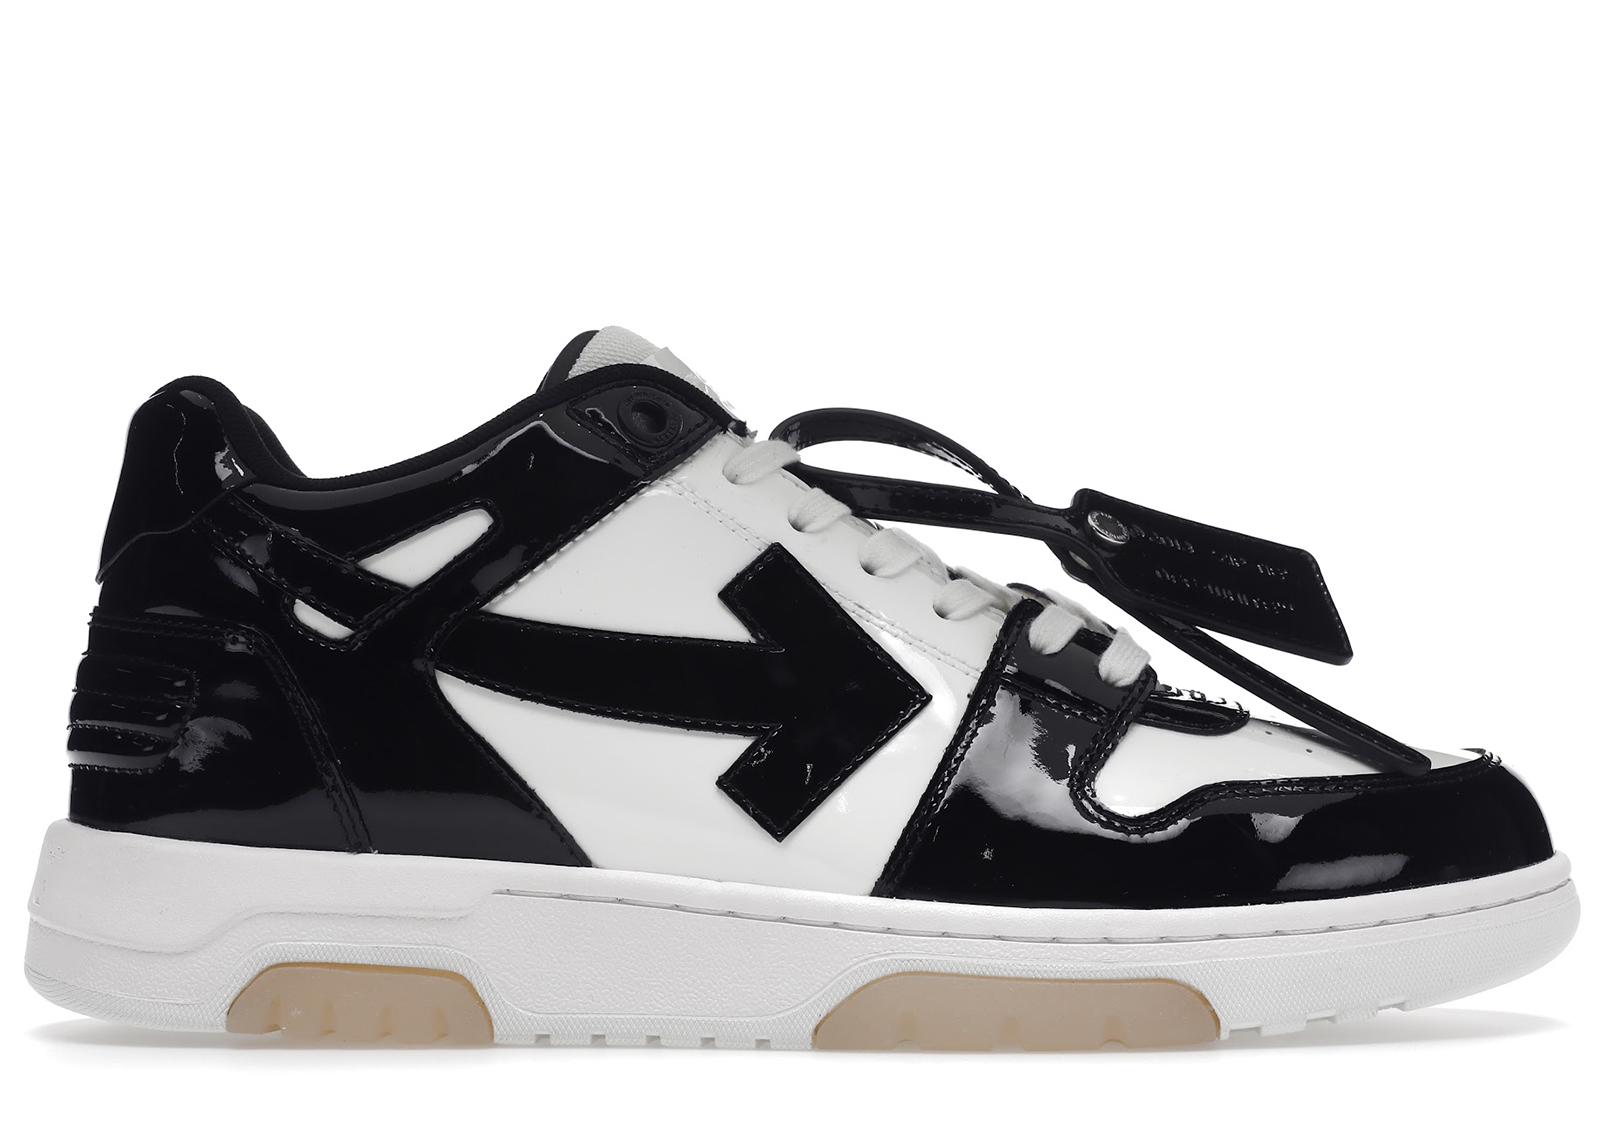 OFF-WHITE Out Of Office "OOO" Low Black White (Women's)